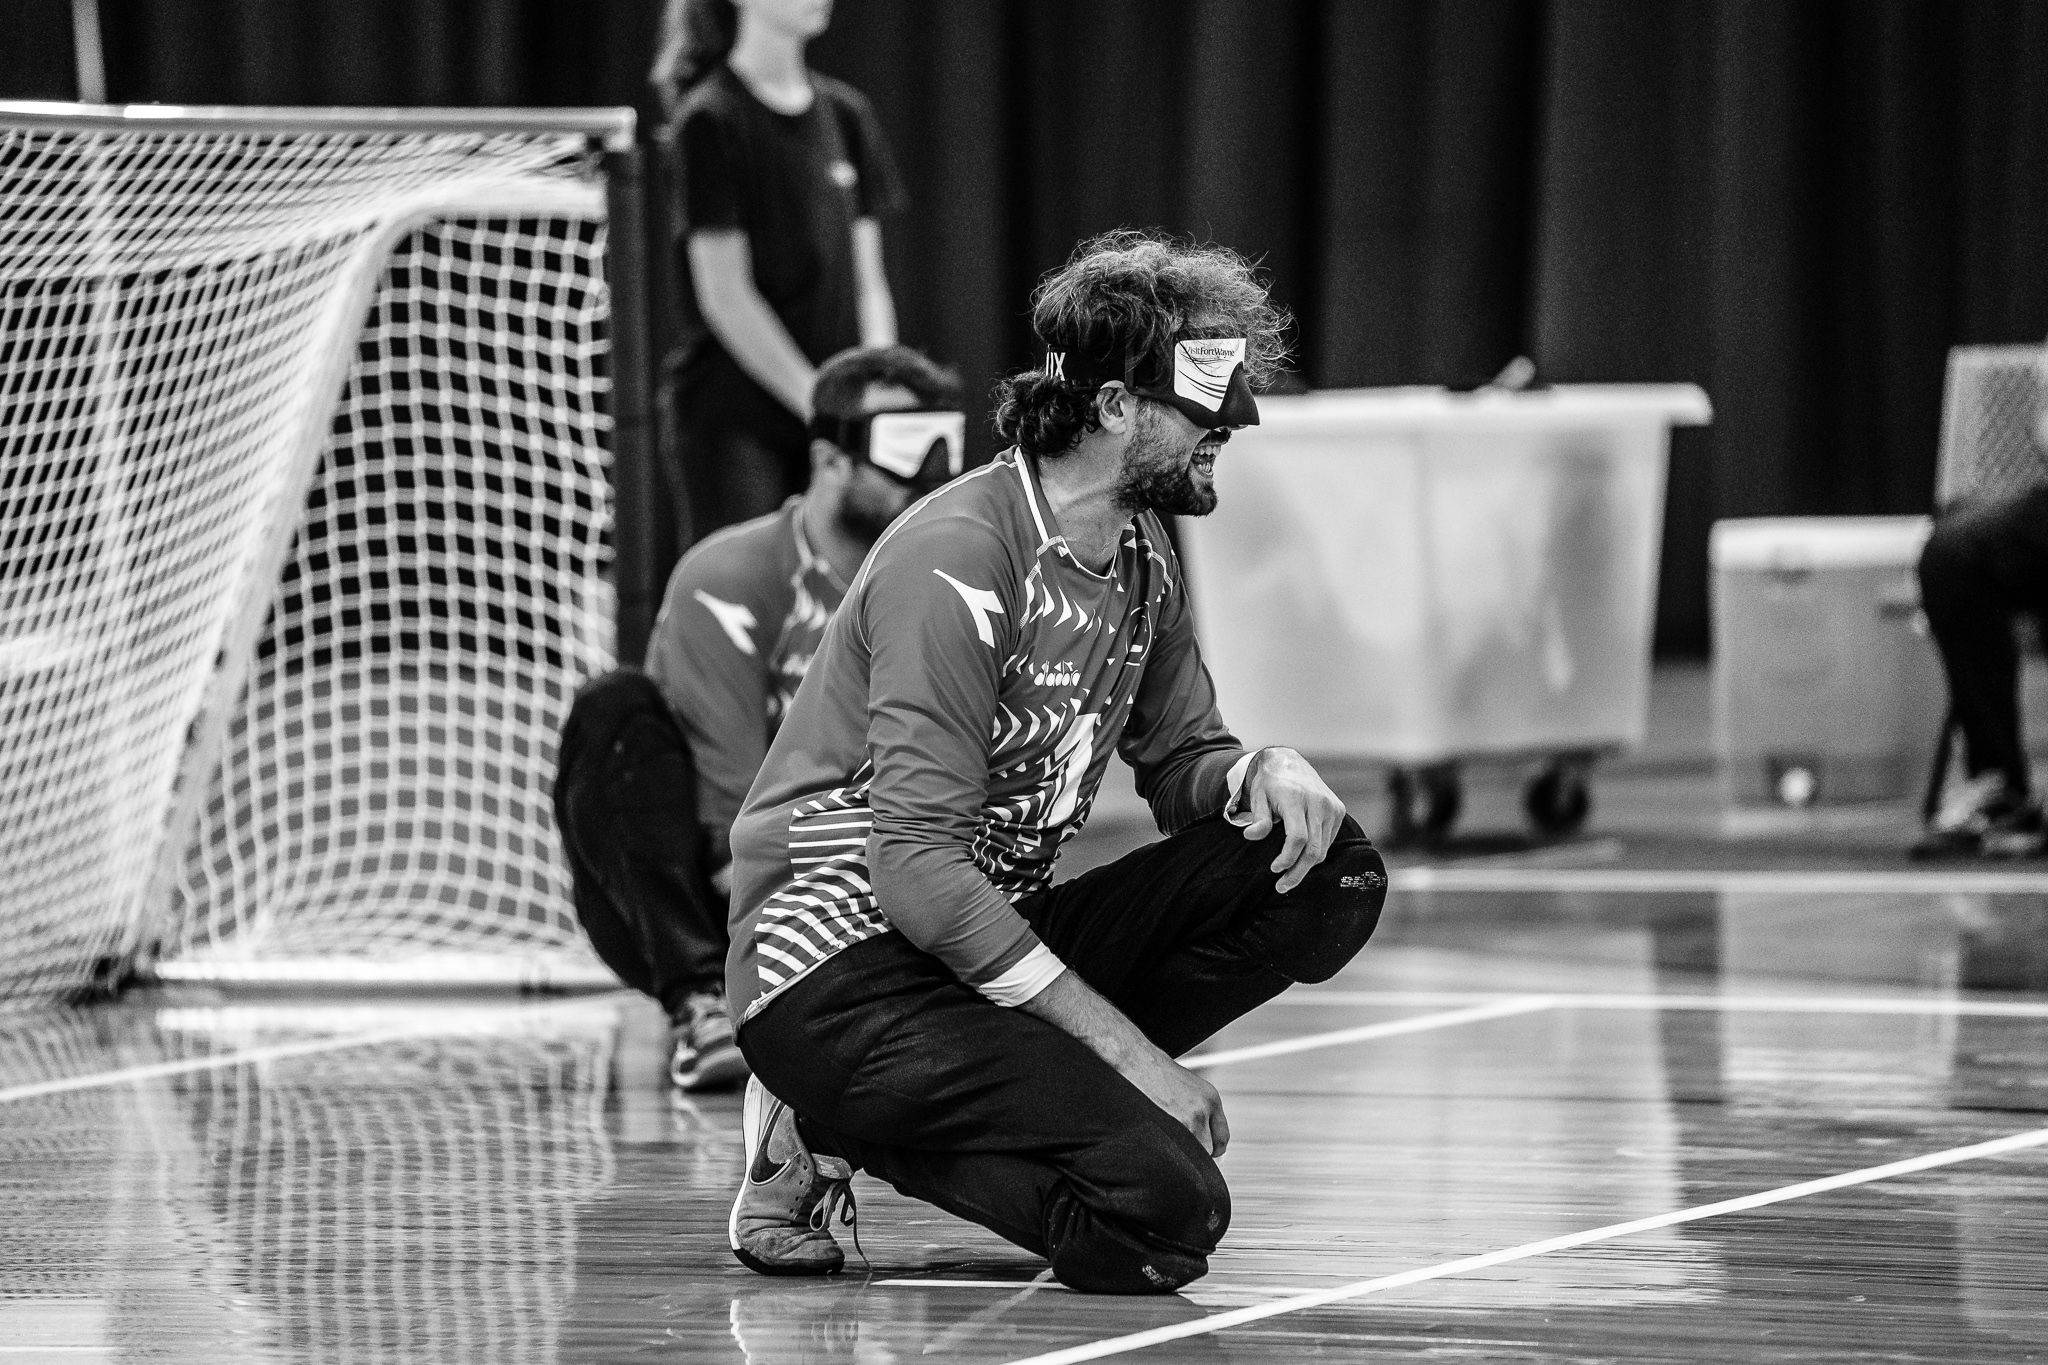 Huseyin Alkan of Turkey men's goalball team kneels on the court during a game